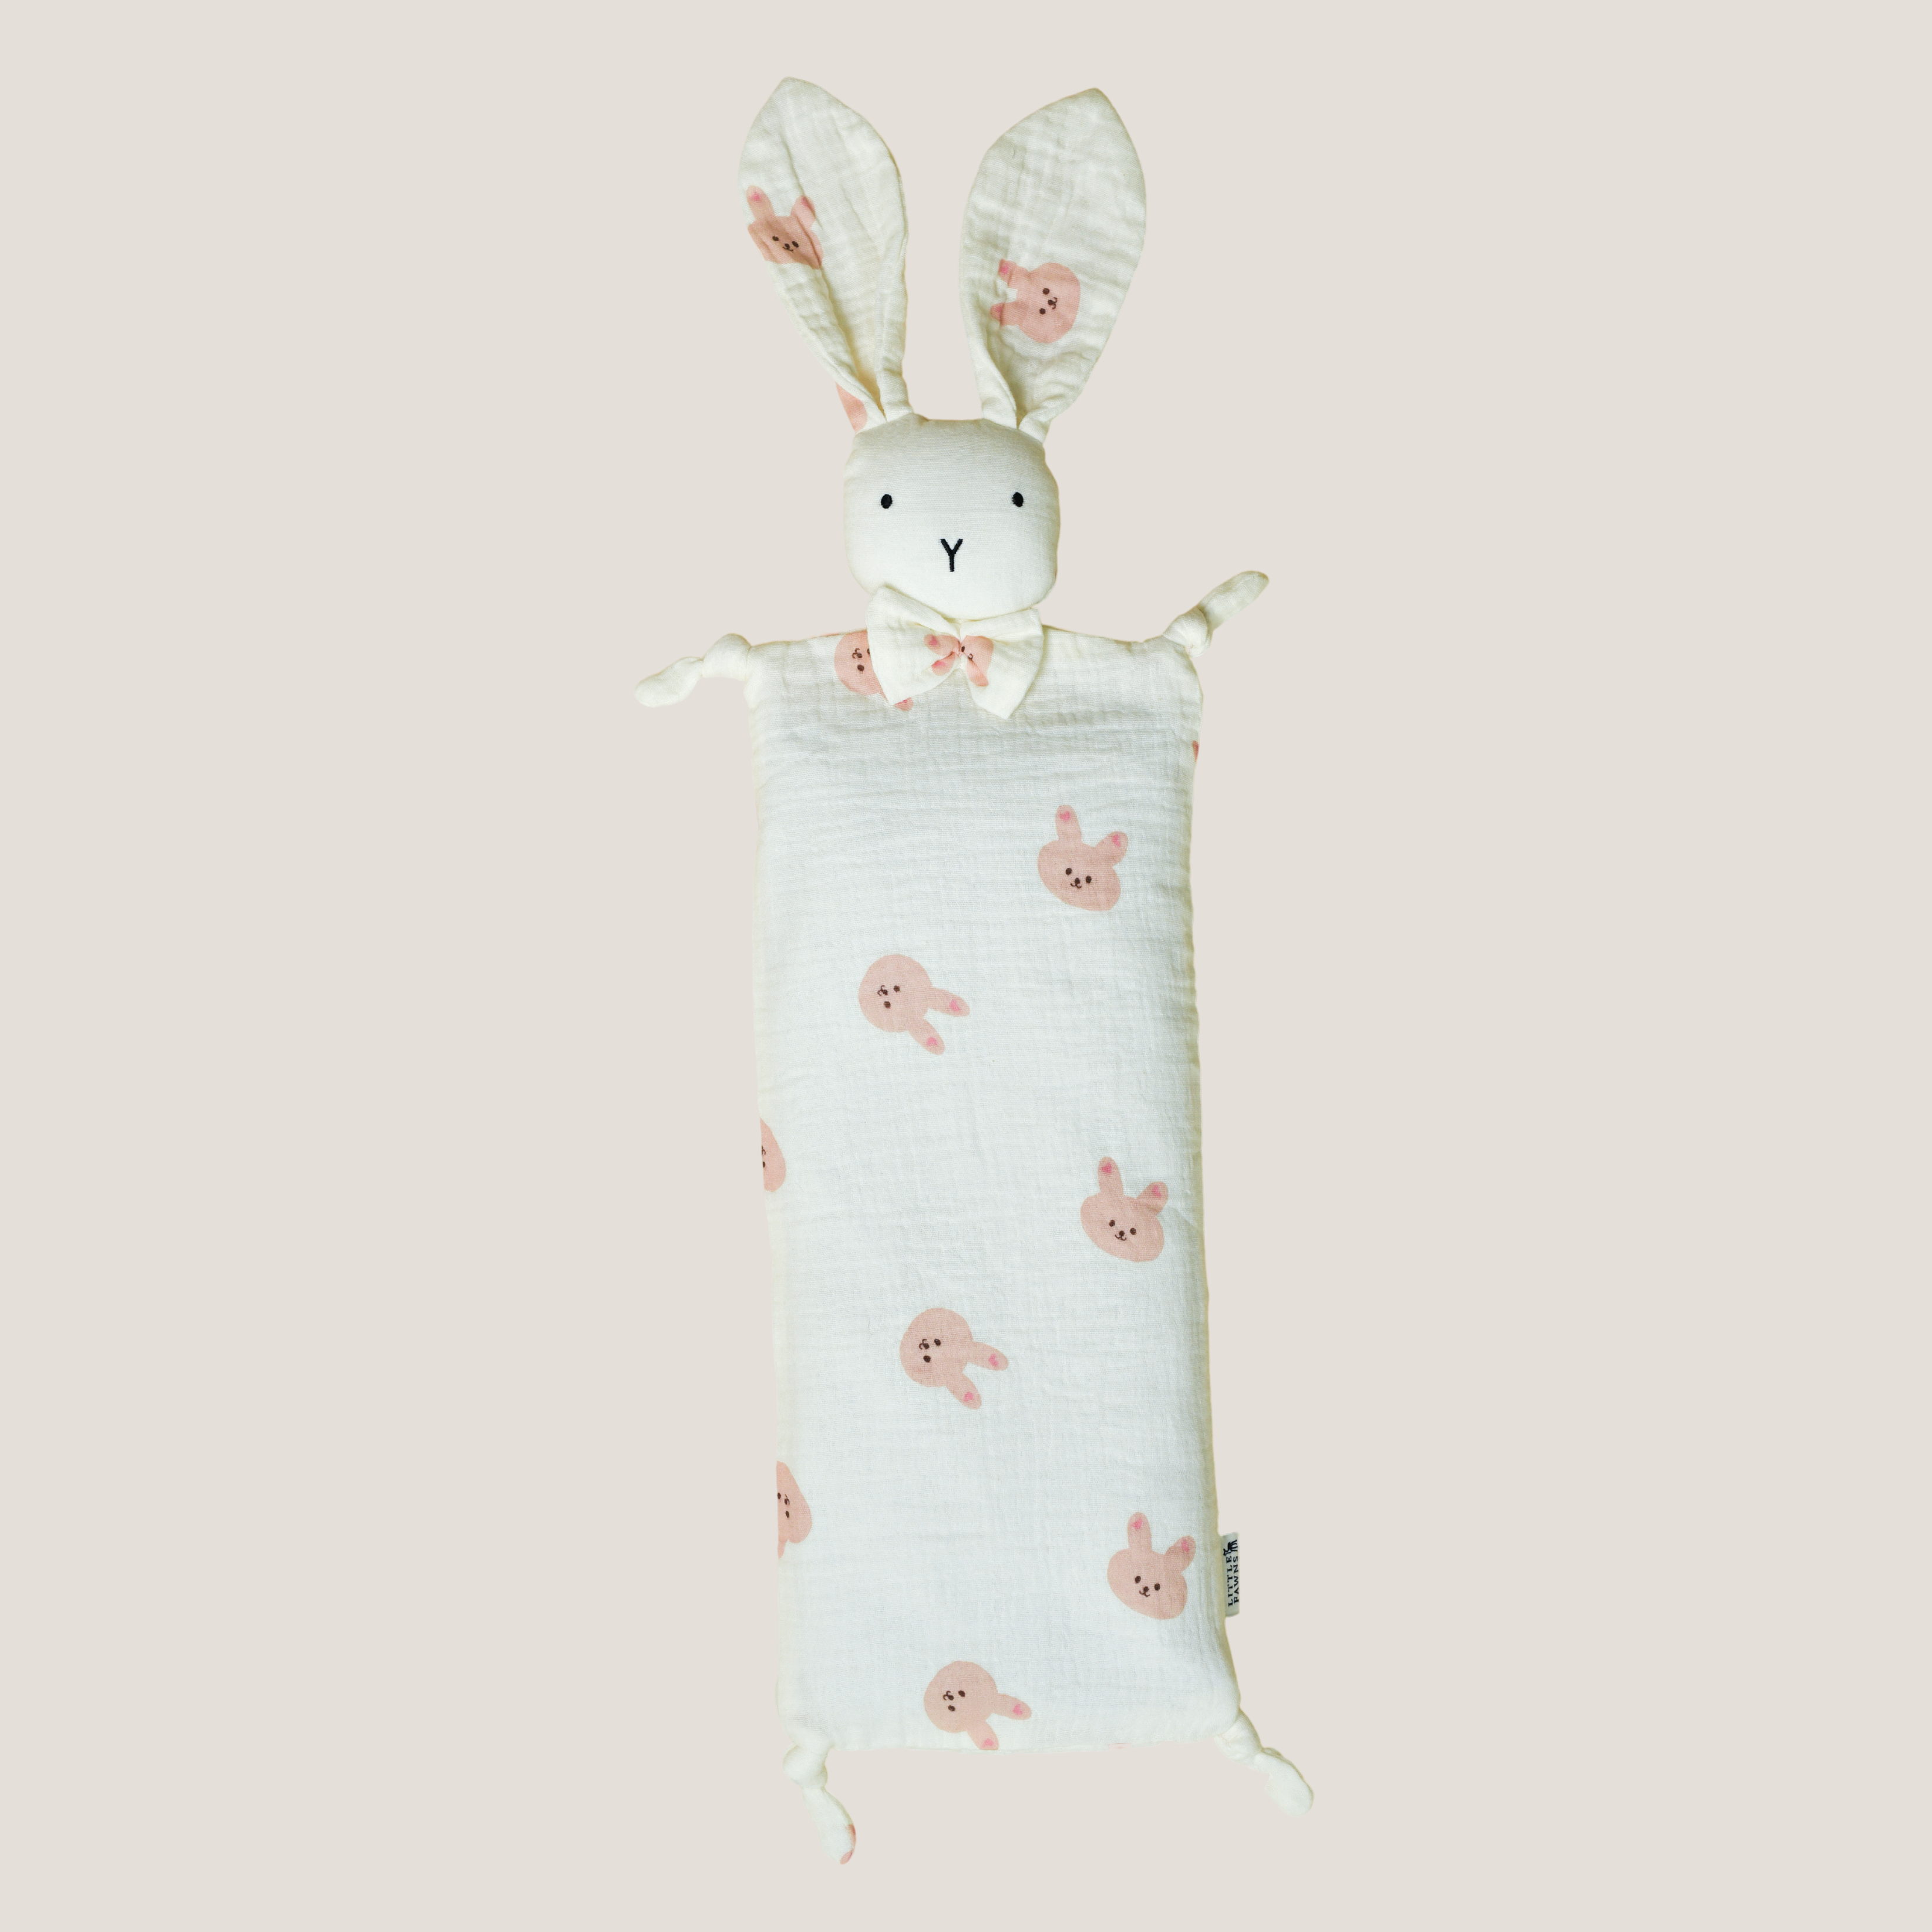 Snuggly Bunny Beansprout Husk Pillow in Rabbit